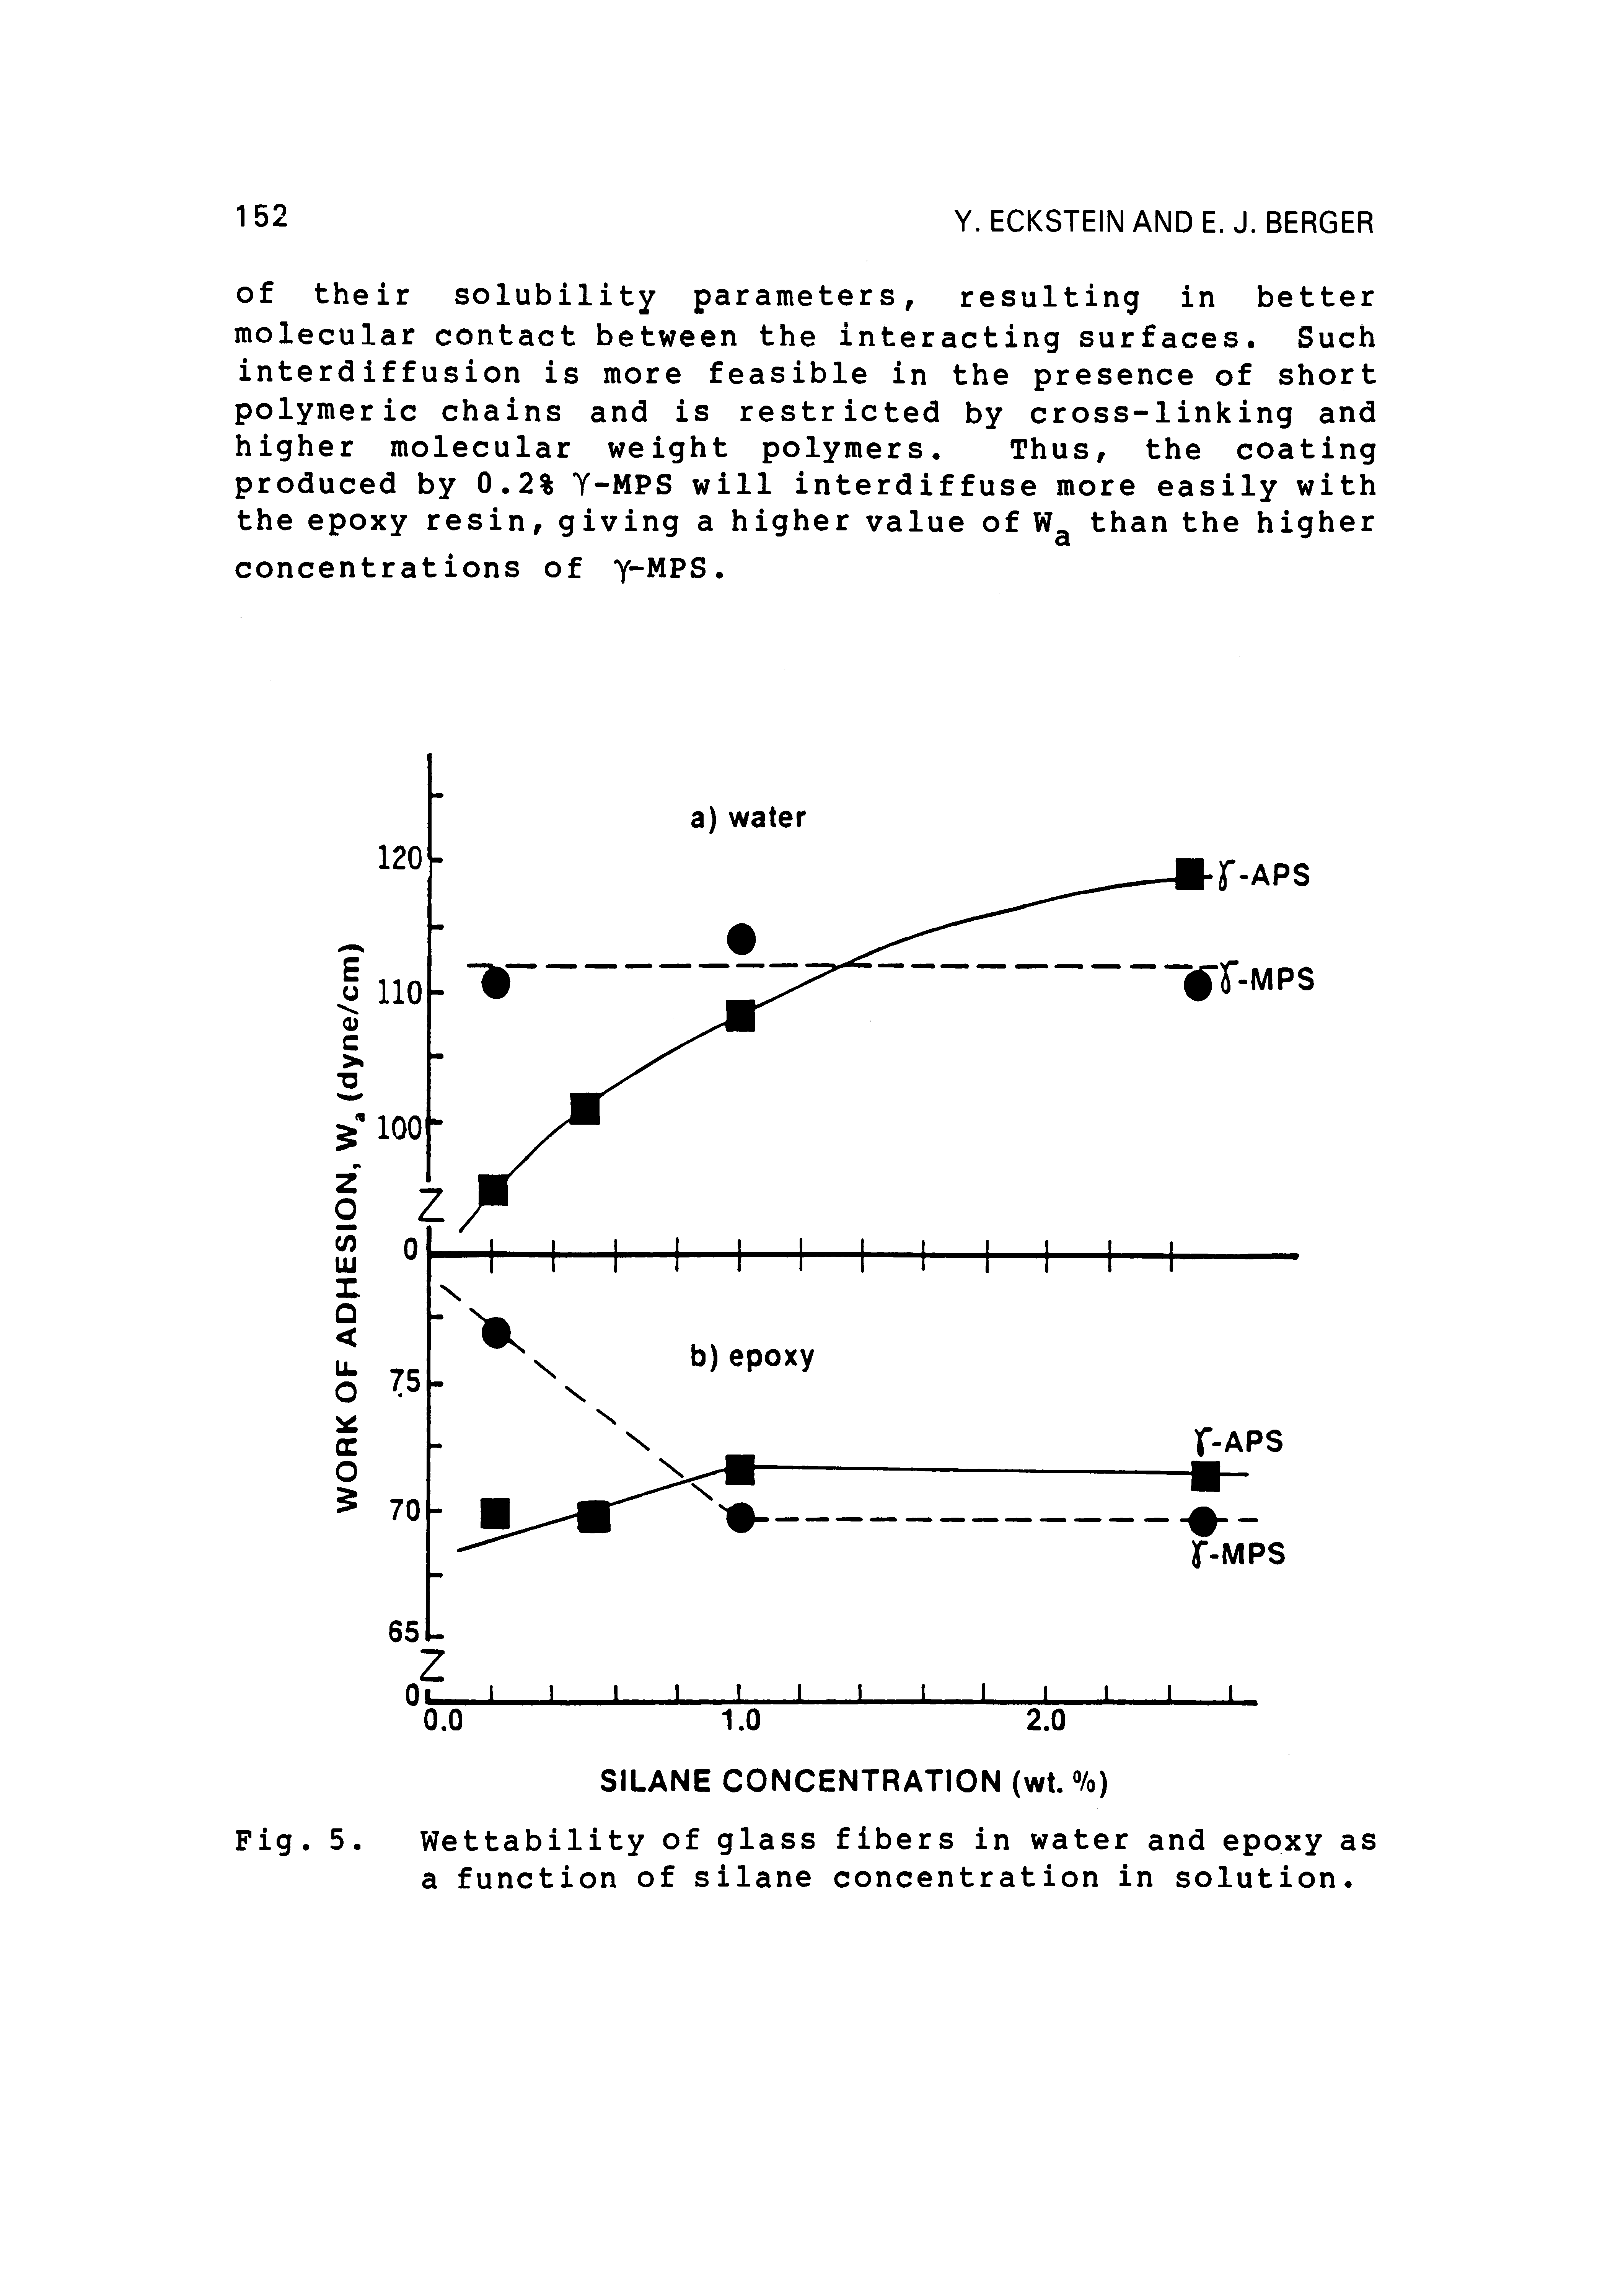 Fig. 5. Wettability of glass fibers in water and epoxy as a function of silane concentration in solution.